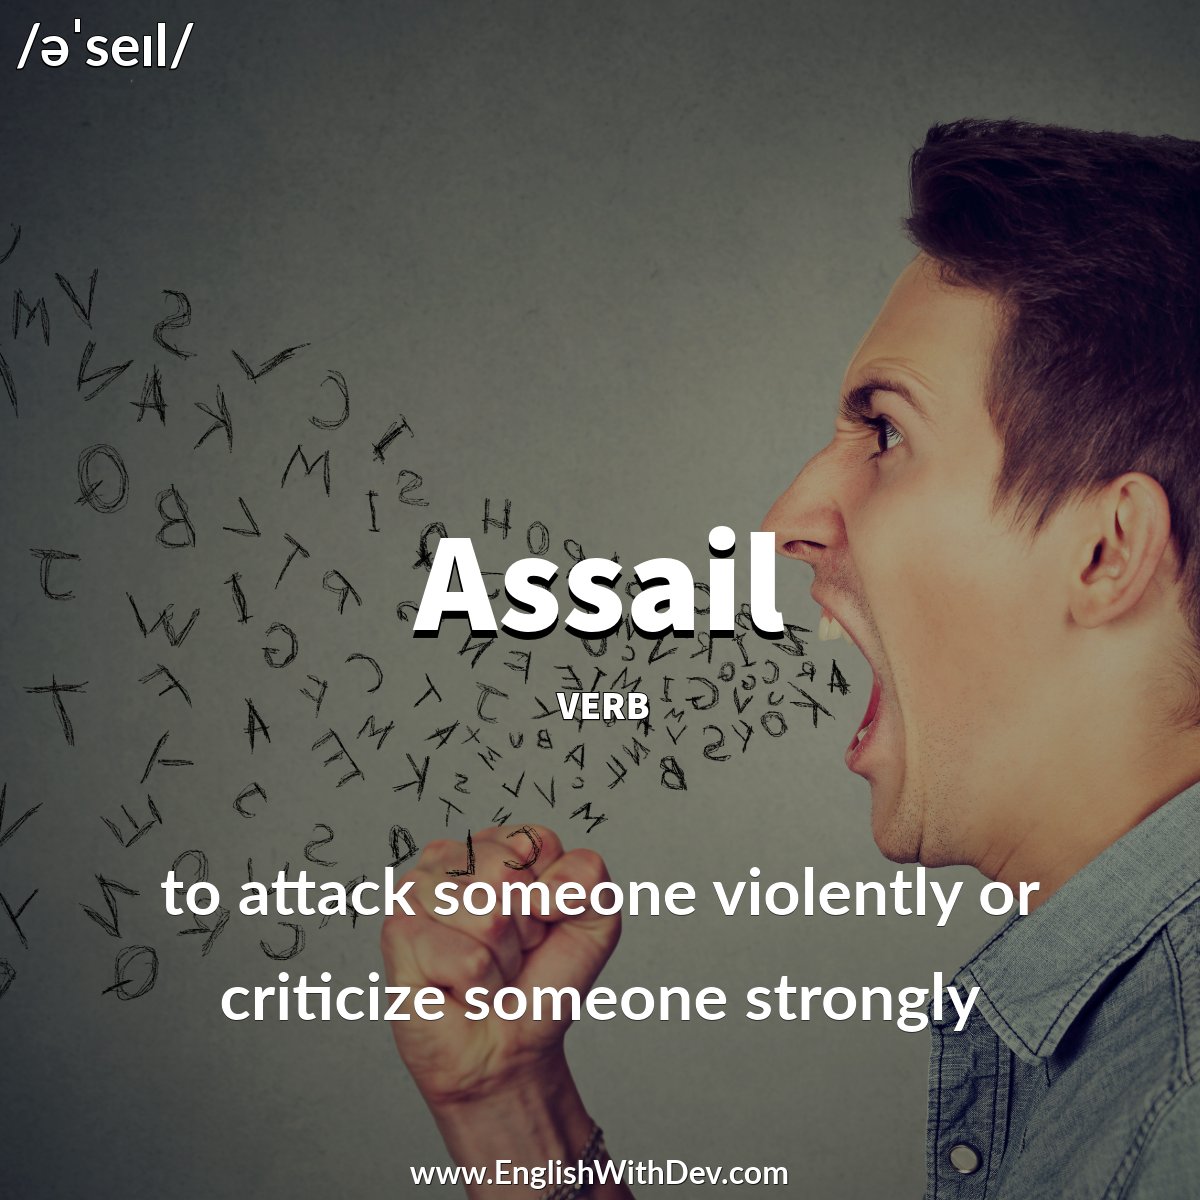 'He was assailed with insults and abuse as he left the court.'
#Assail